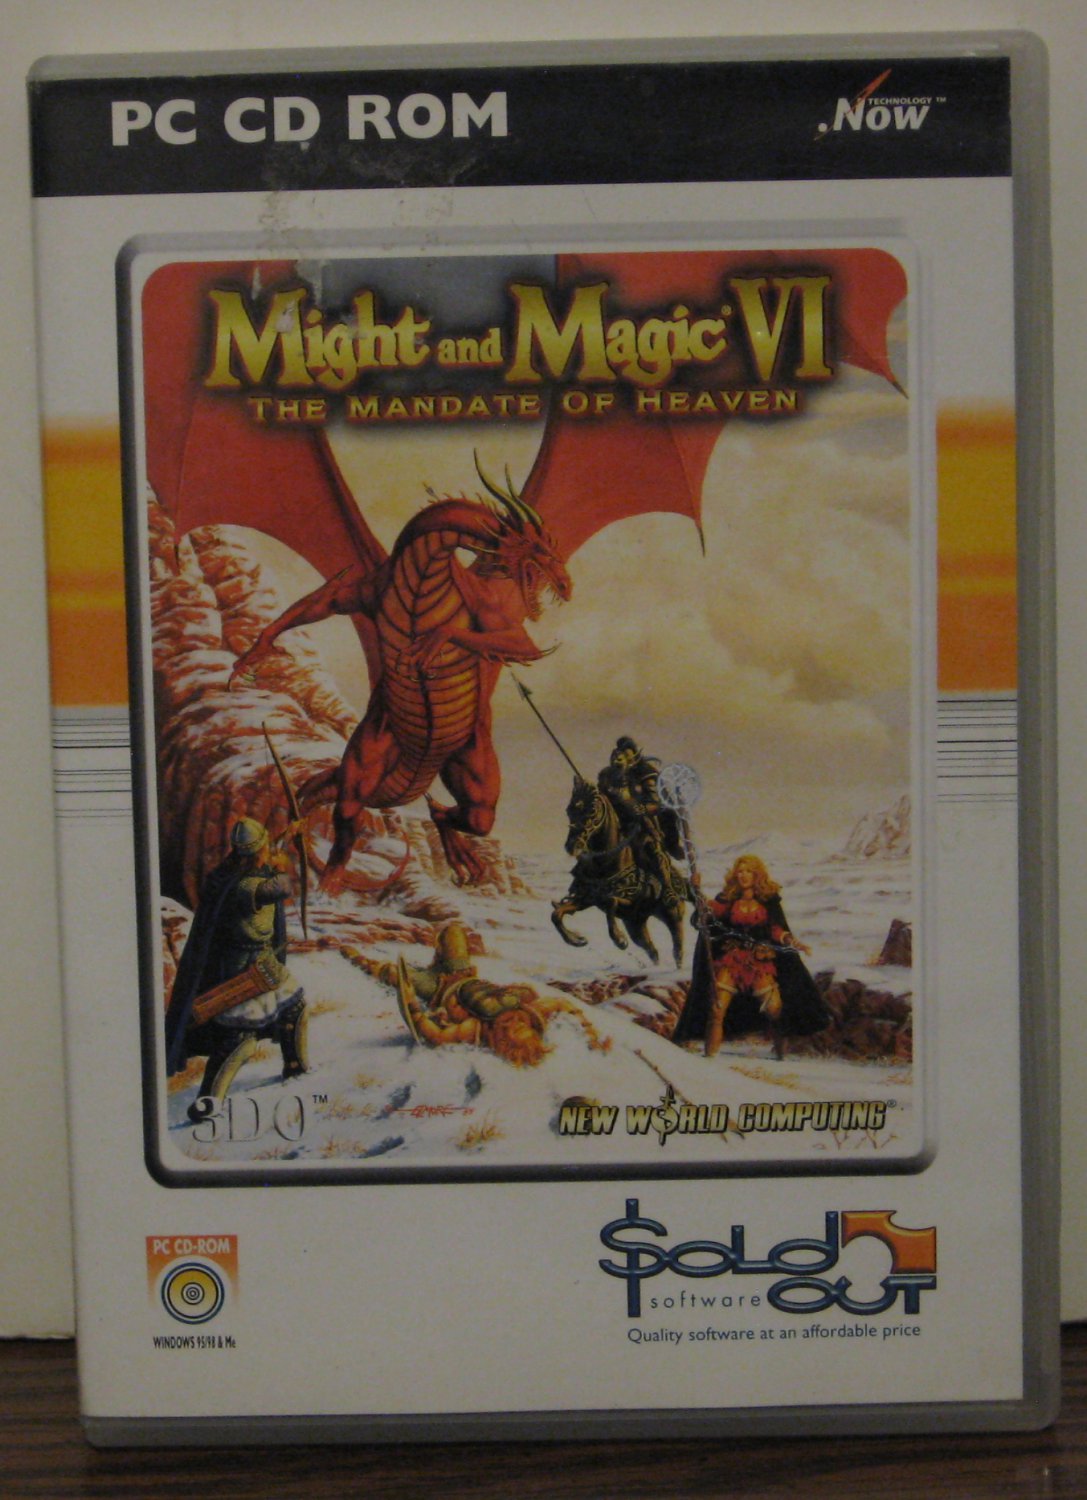 PC CD Game - Might and Magic VI Mandate of Heaven - 3D0 / New World - 2001 Vintage